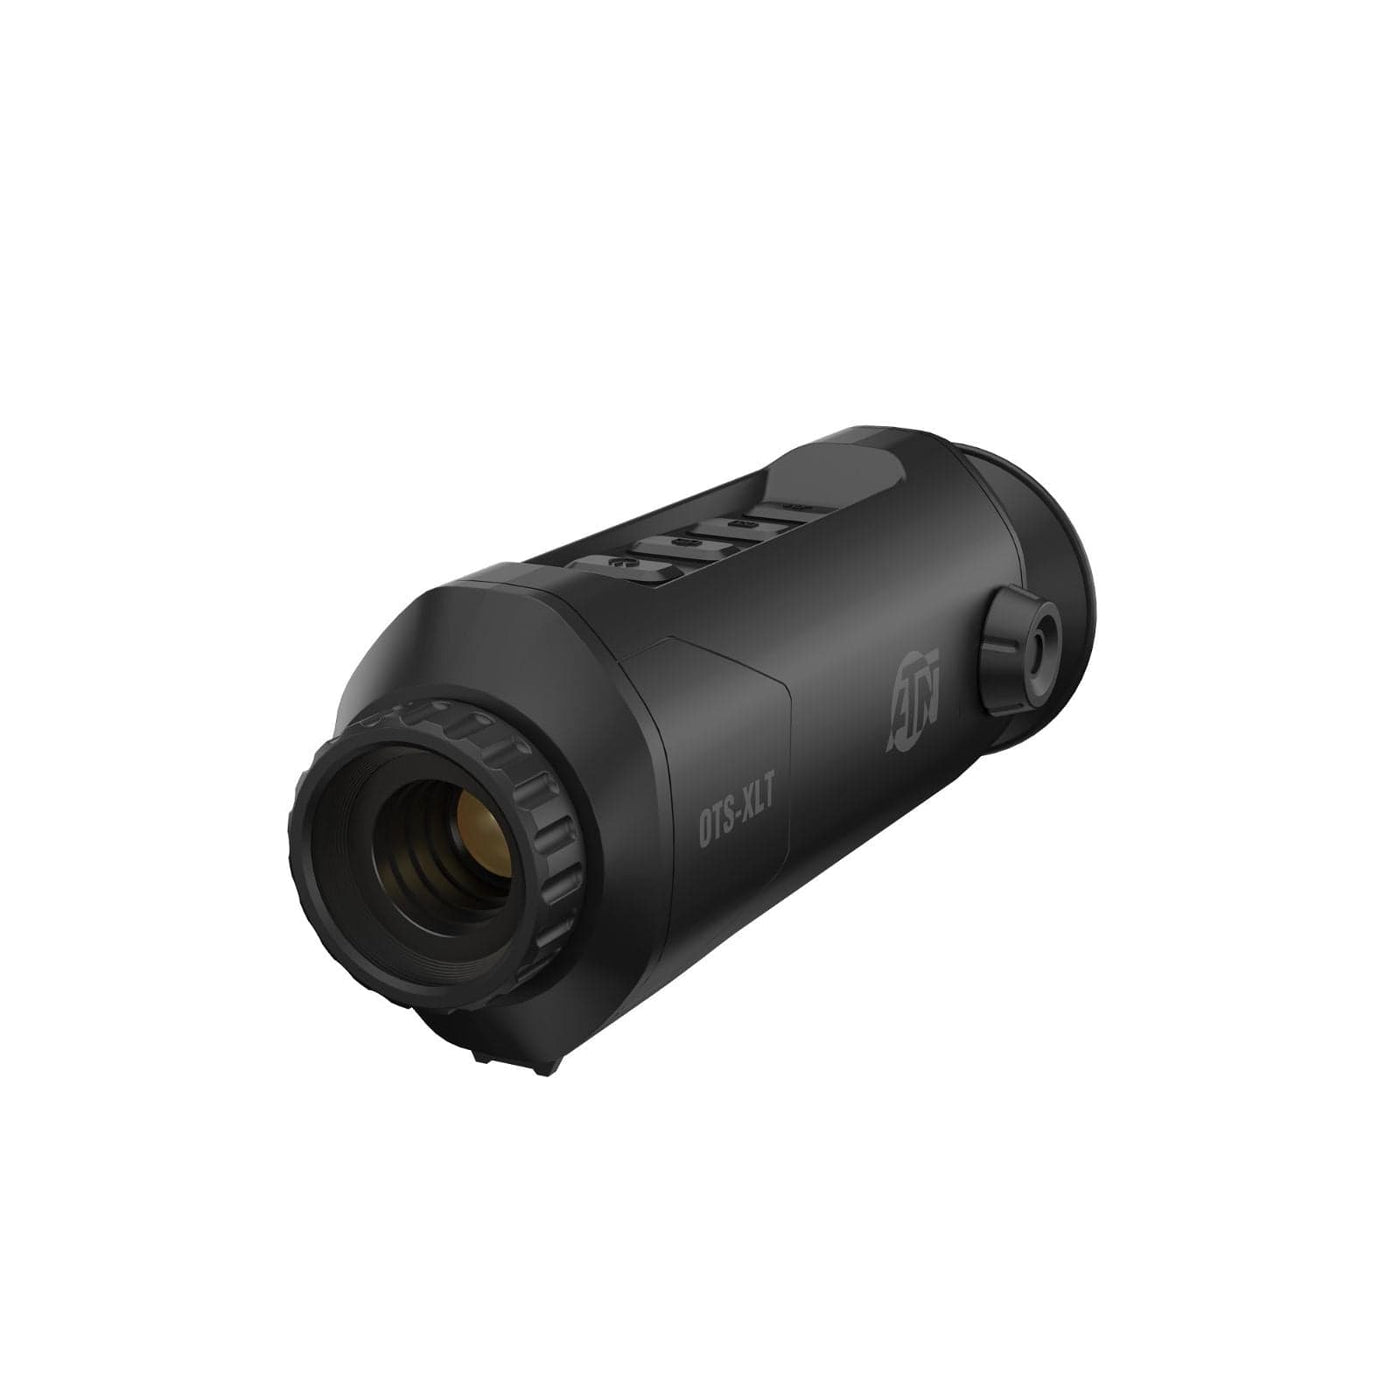 ATN ATN OTS-XLT 2-8x Thermal Monocular Nightvision And Thermal